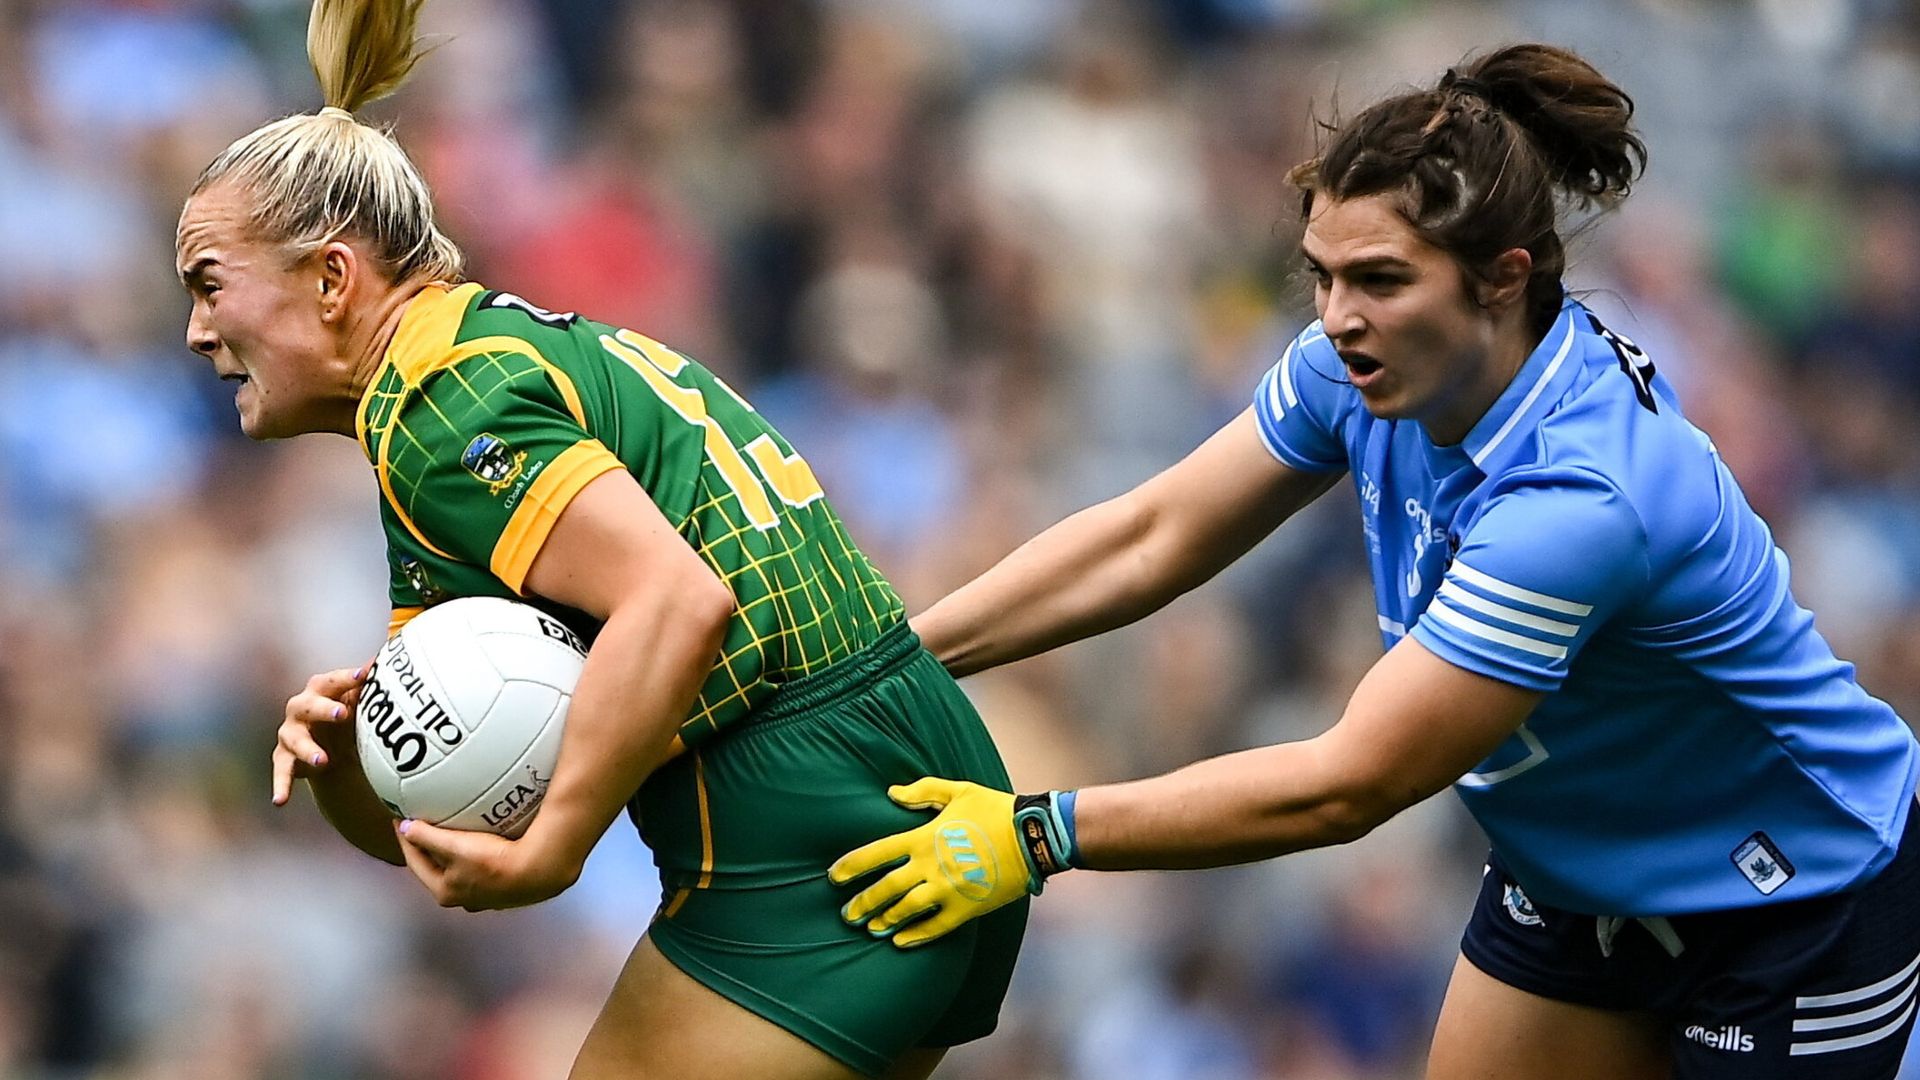 Dubs relishing another crack at All-Ireland champions